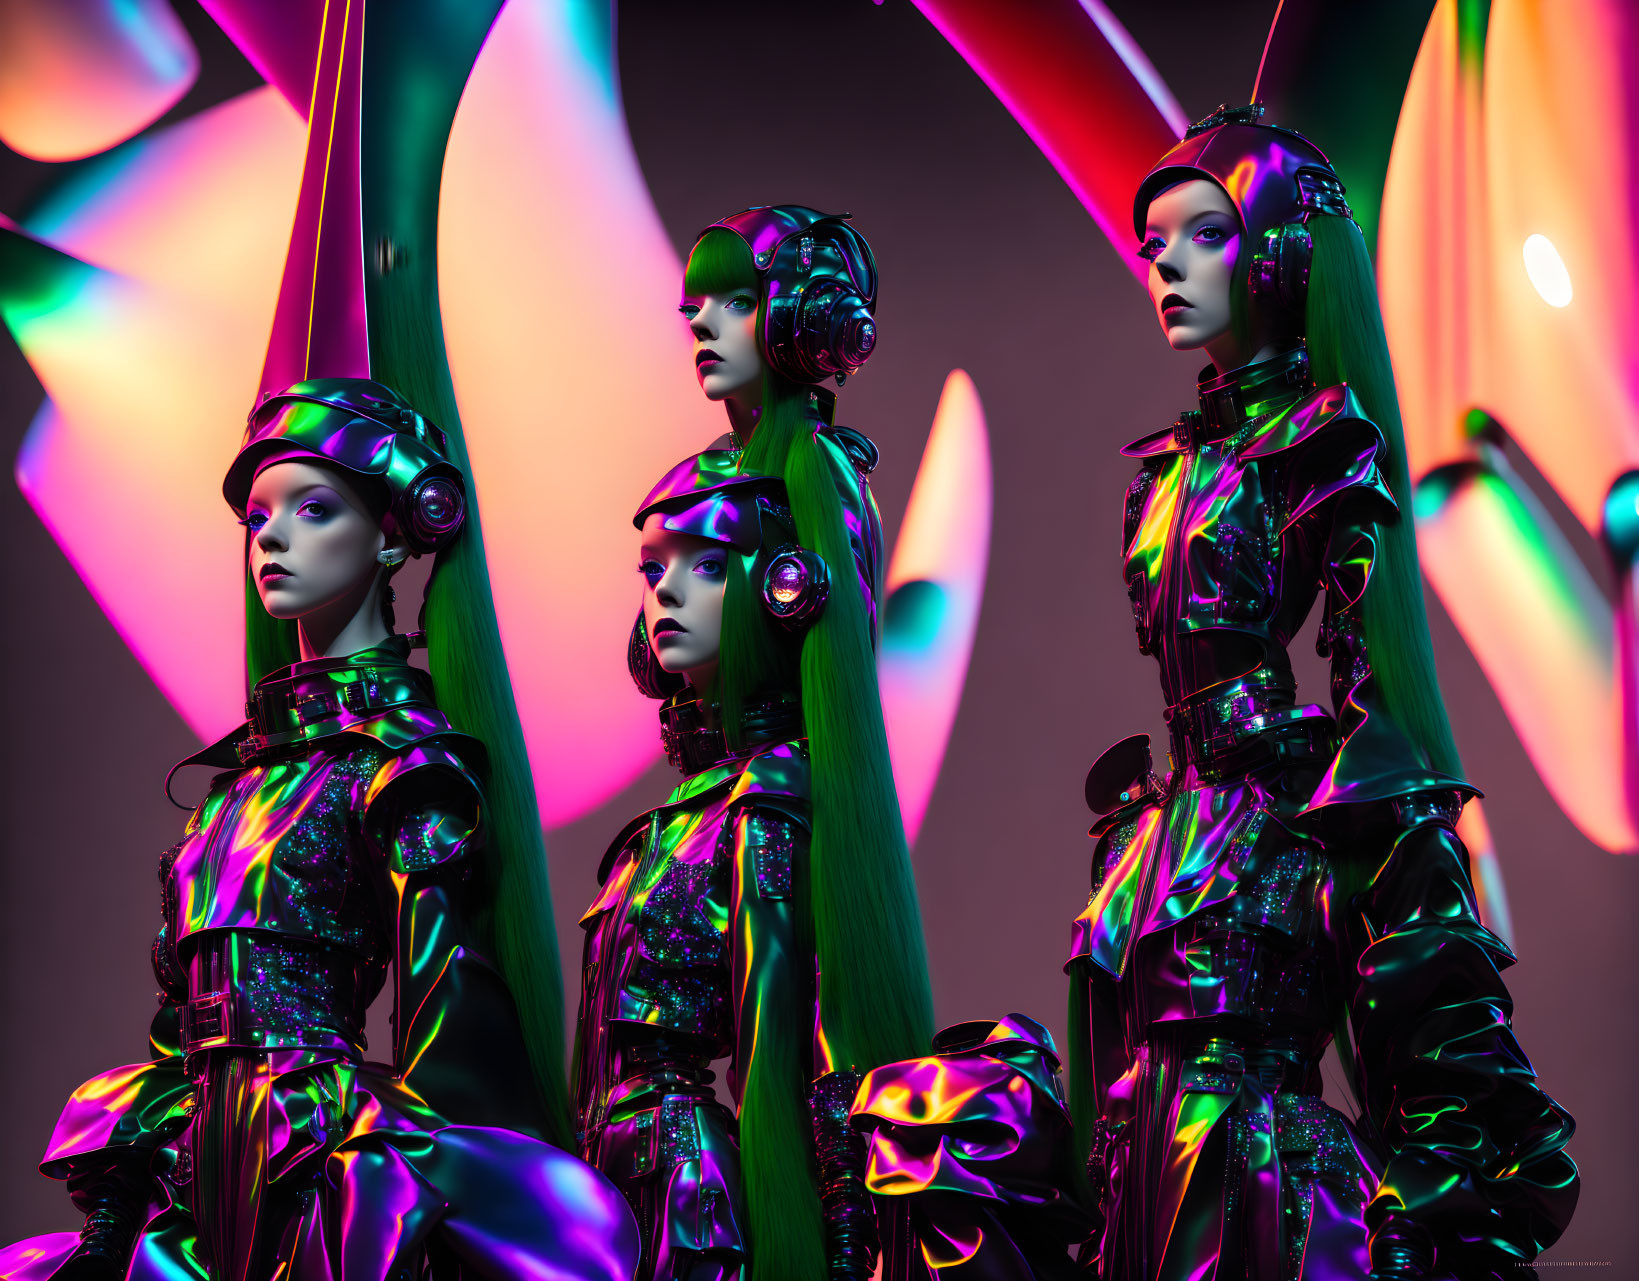 Four futuristic female mannequins in iridescent suits and elongated headdresses on colorful abstract